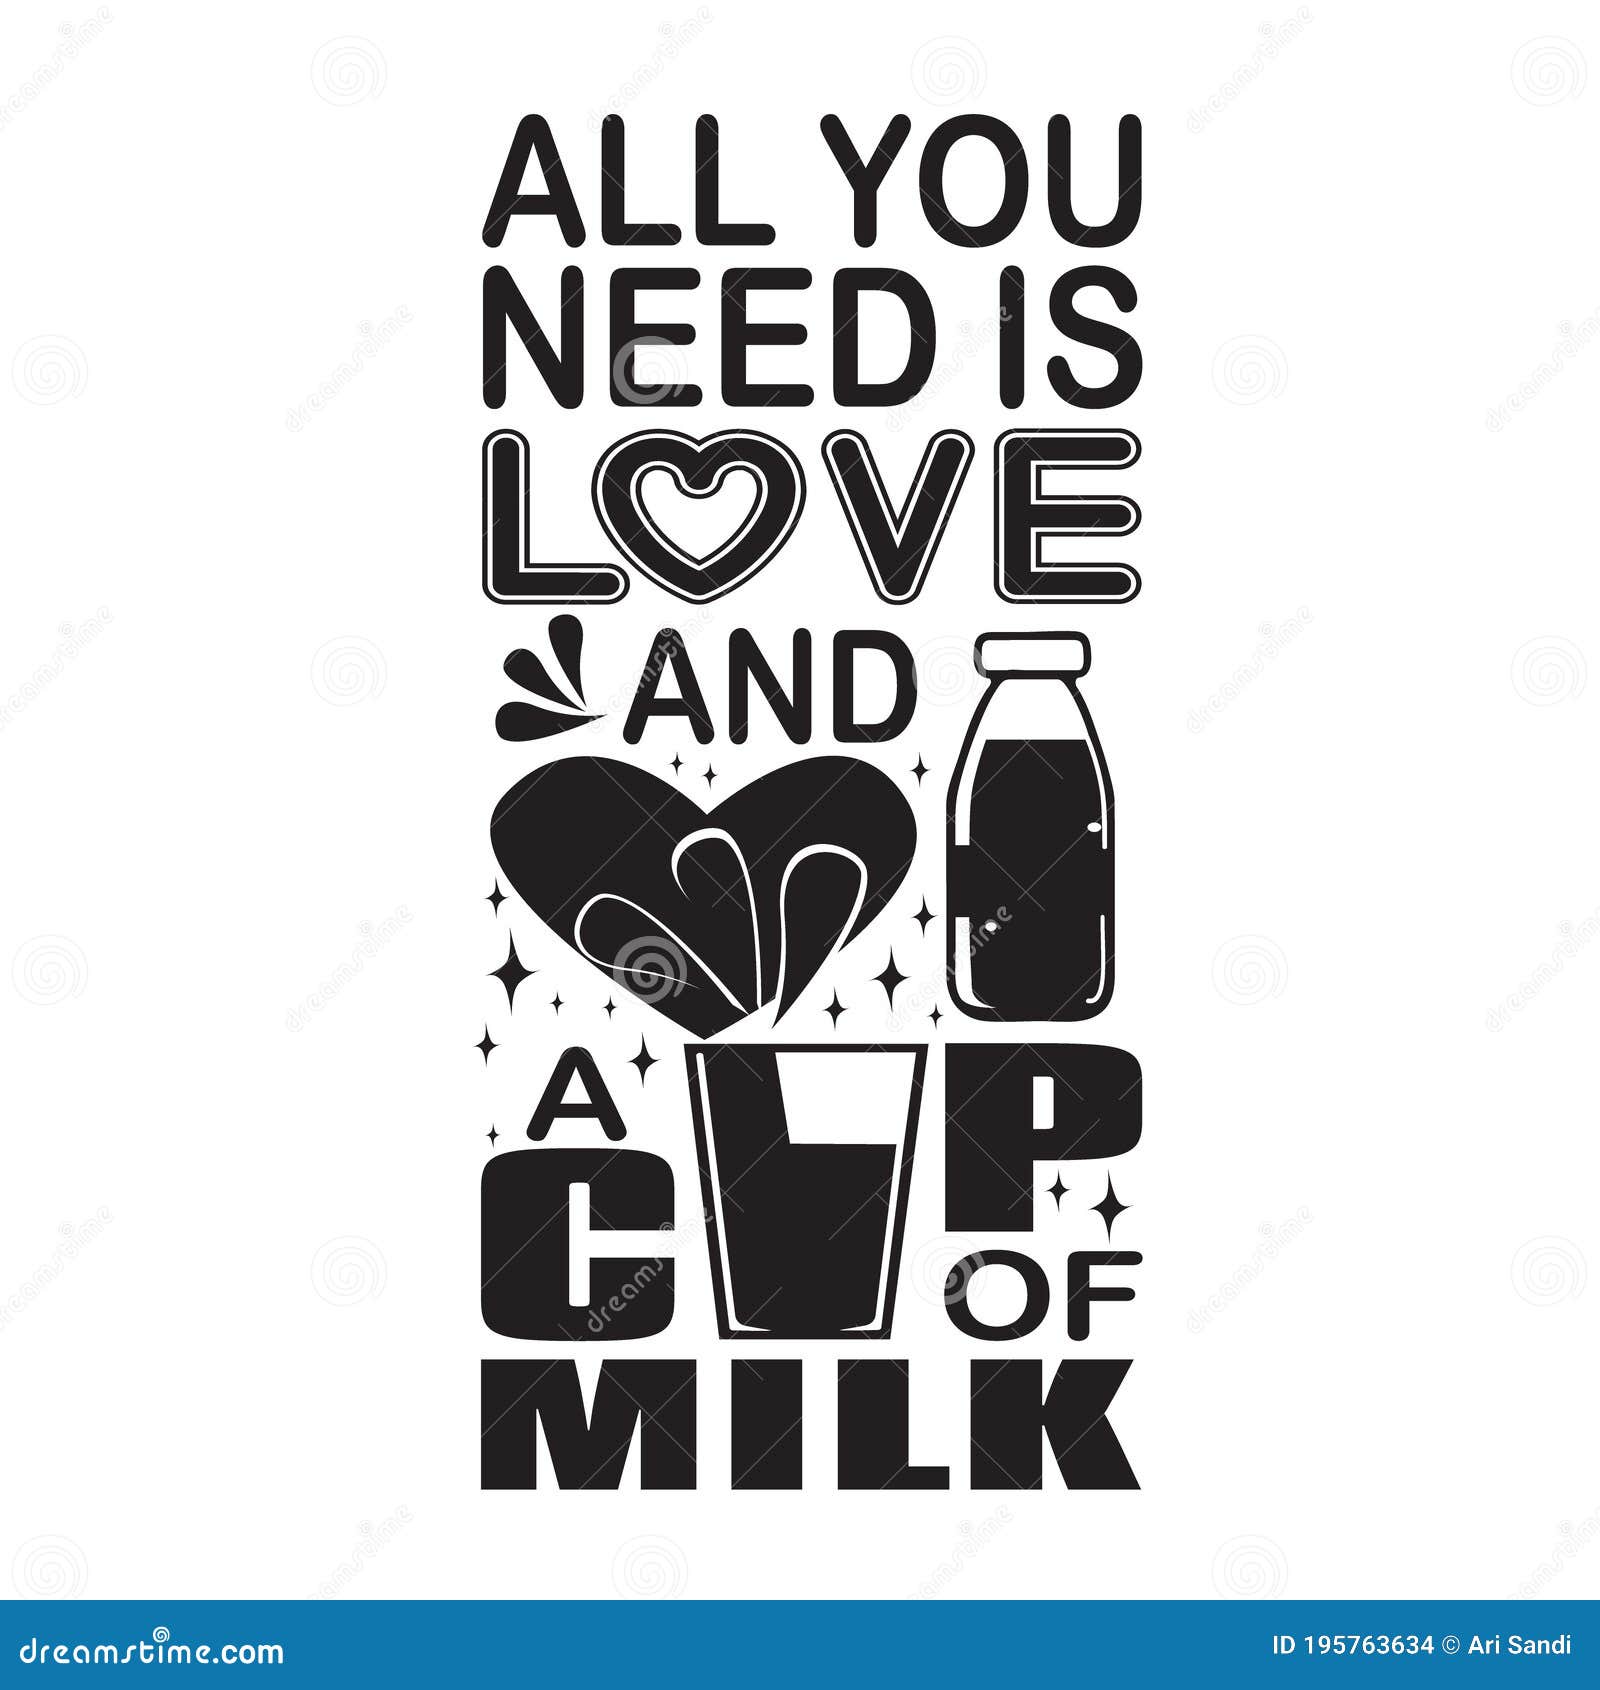 Milk Quote Good For Print All You Need Is Love And Cup Of Milk Stock Illustration Illustration Of Design Card